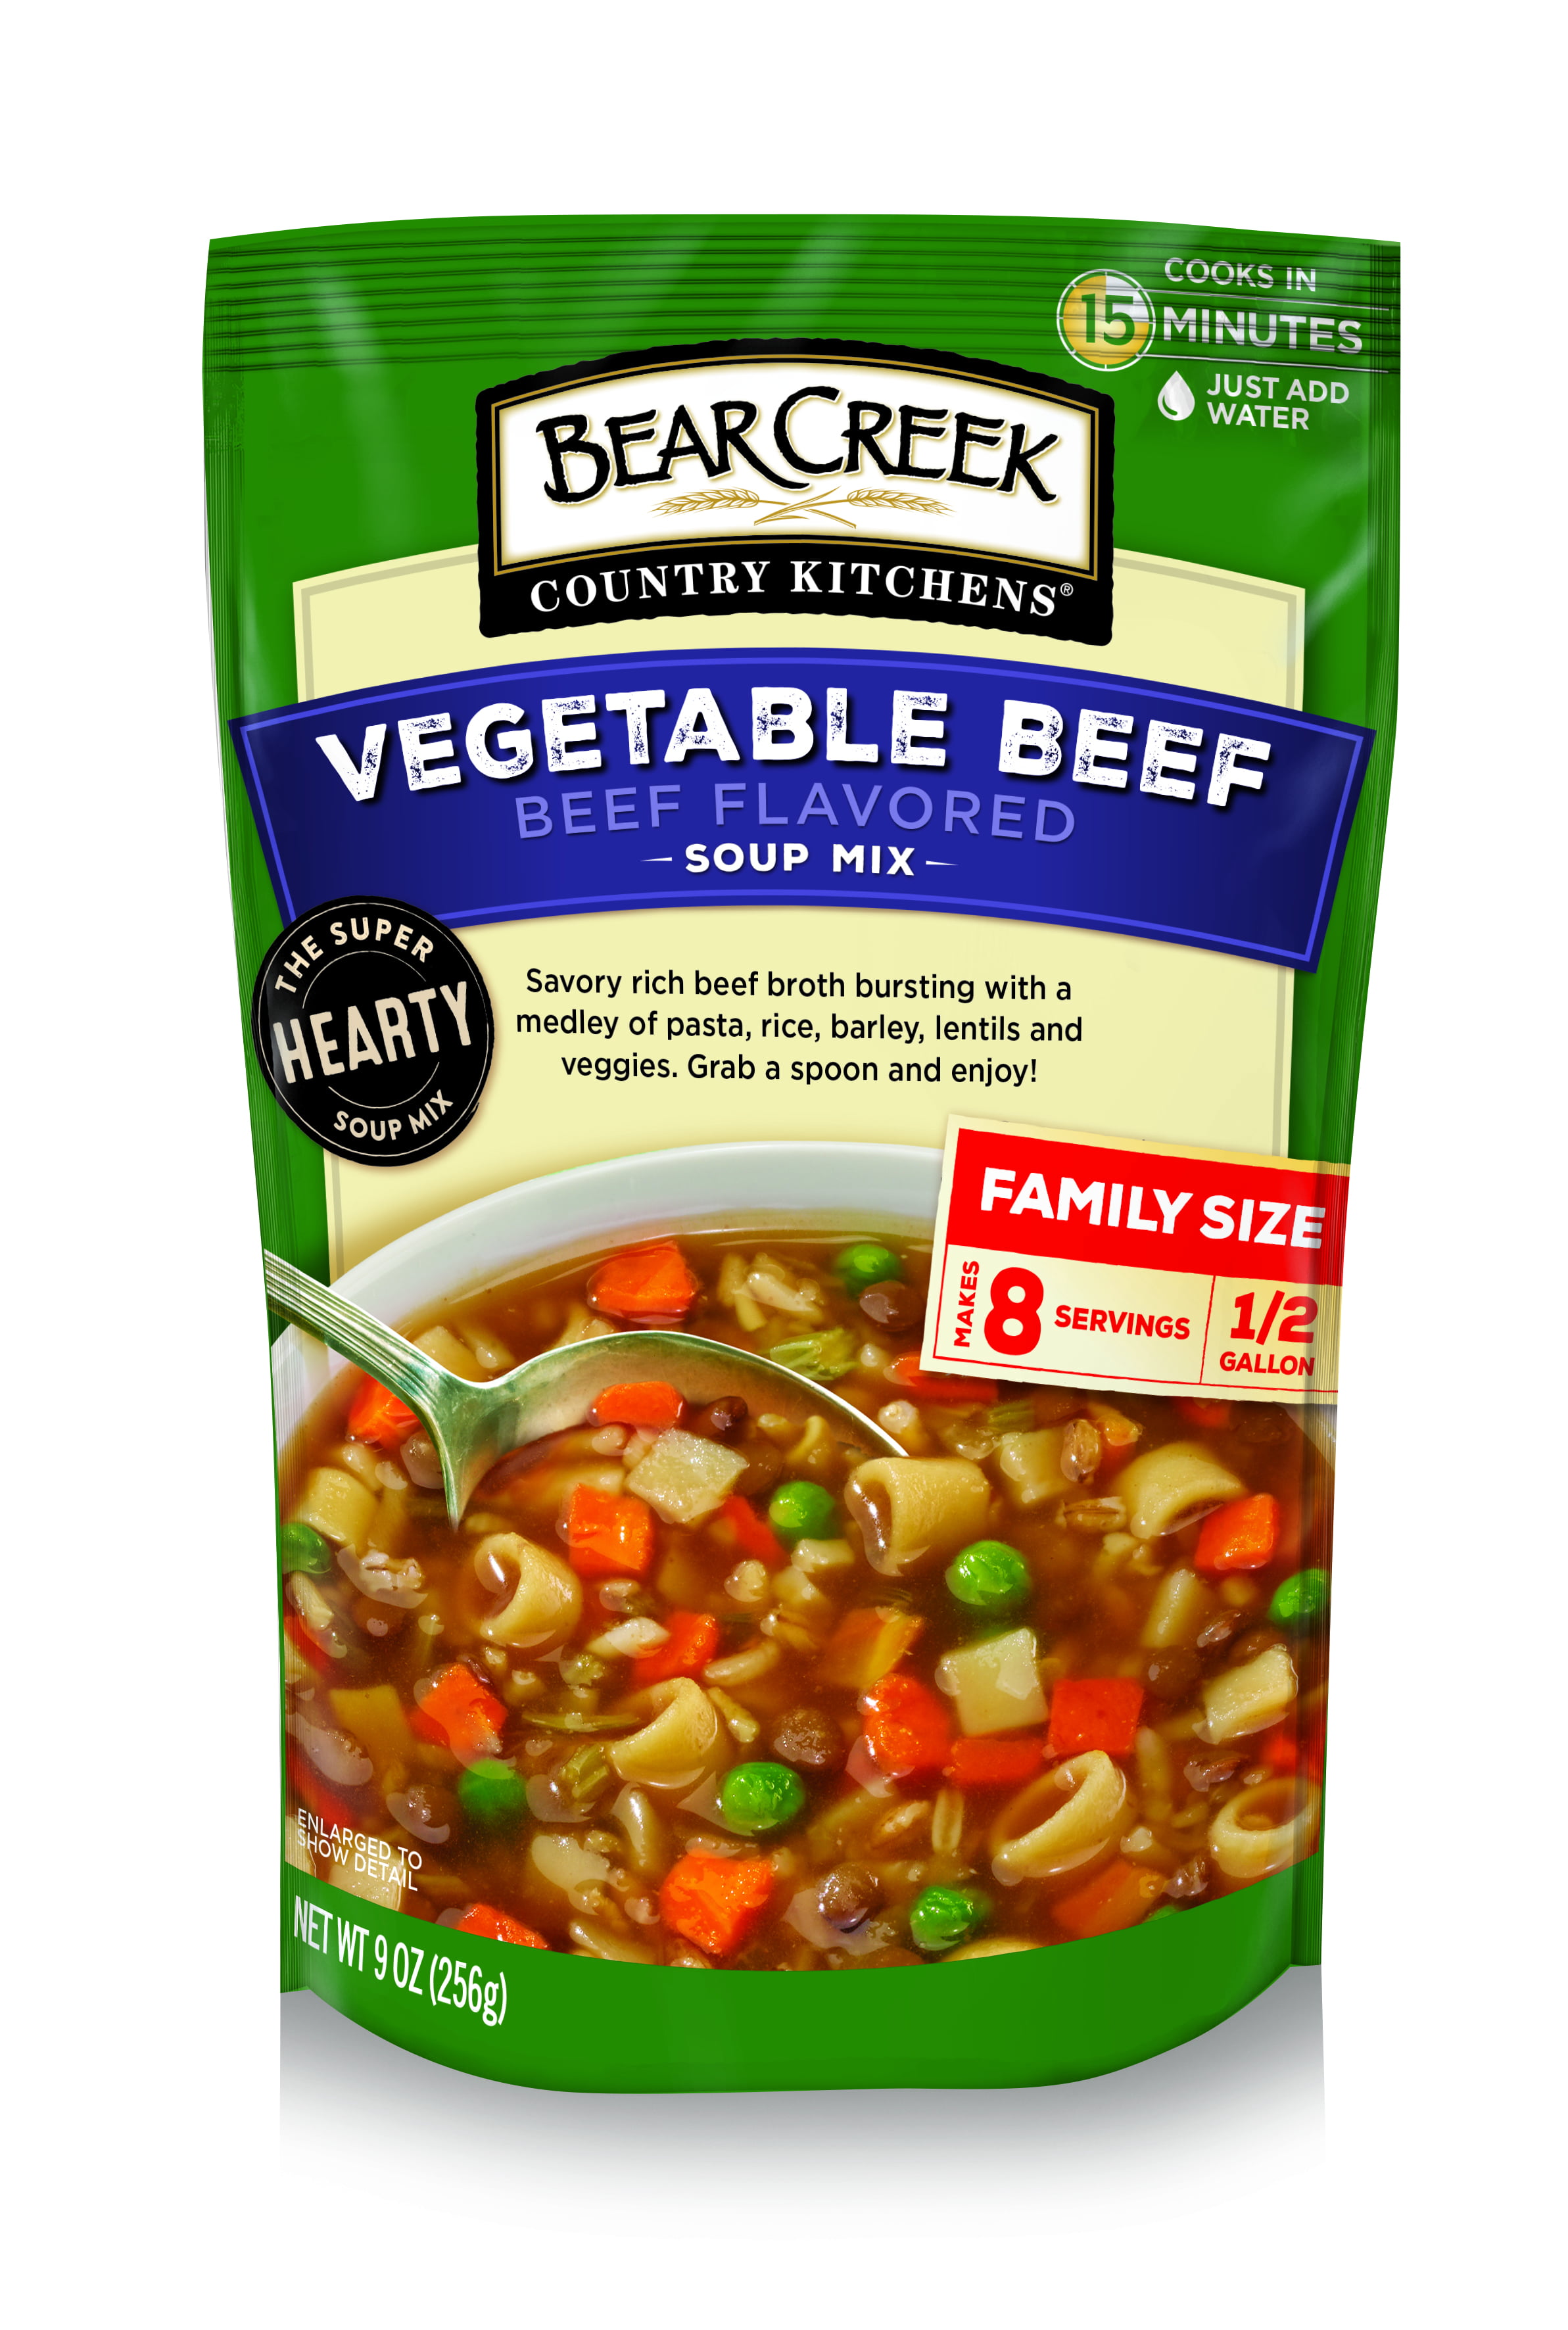 Bear Creek Country Kitchens Vegetable Beef Soup Mix, 9.0 OZ